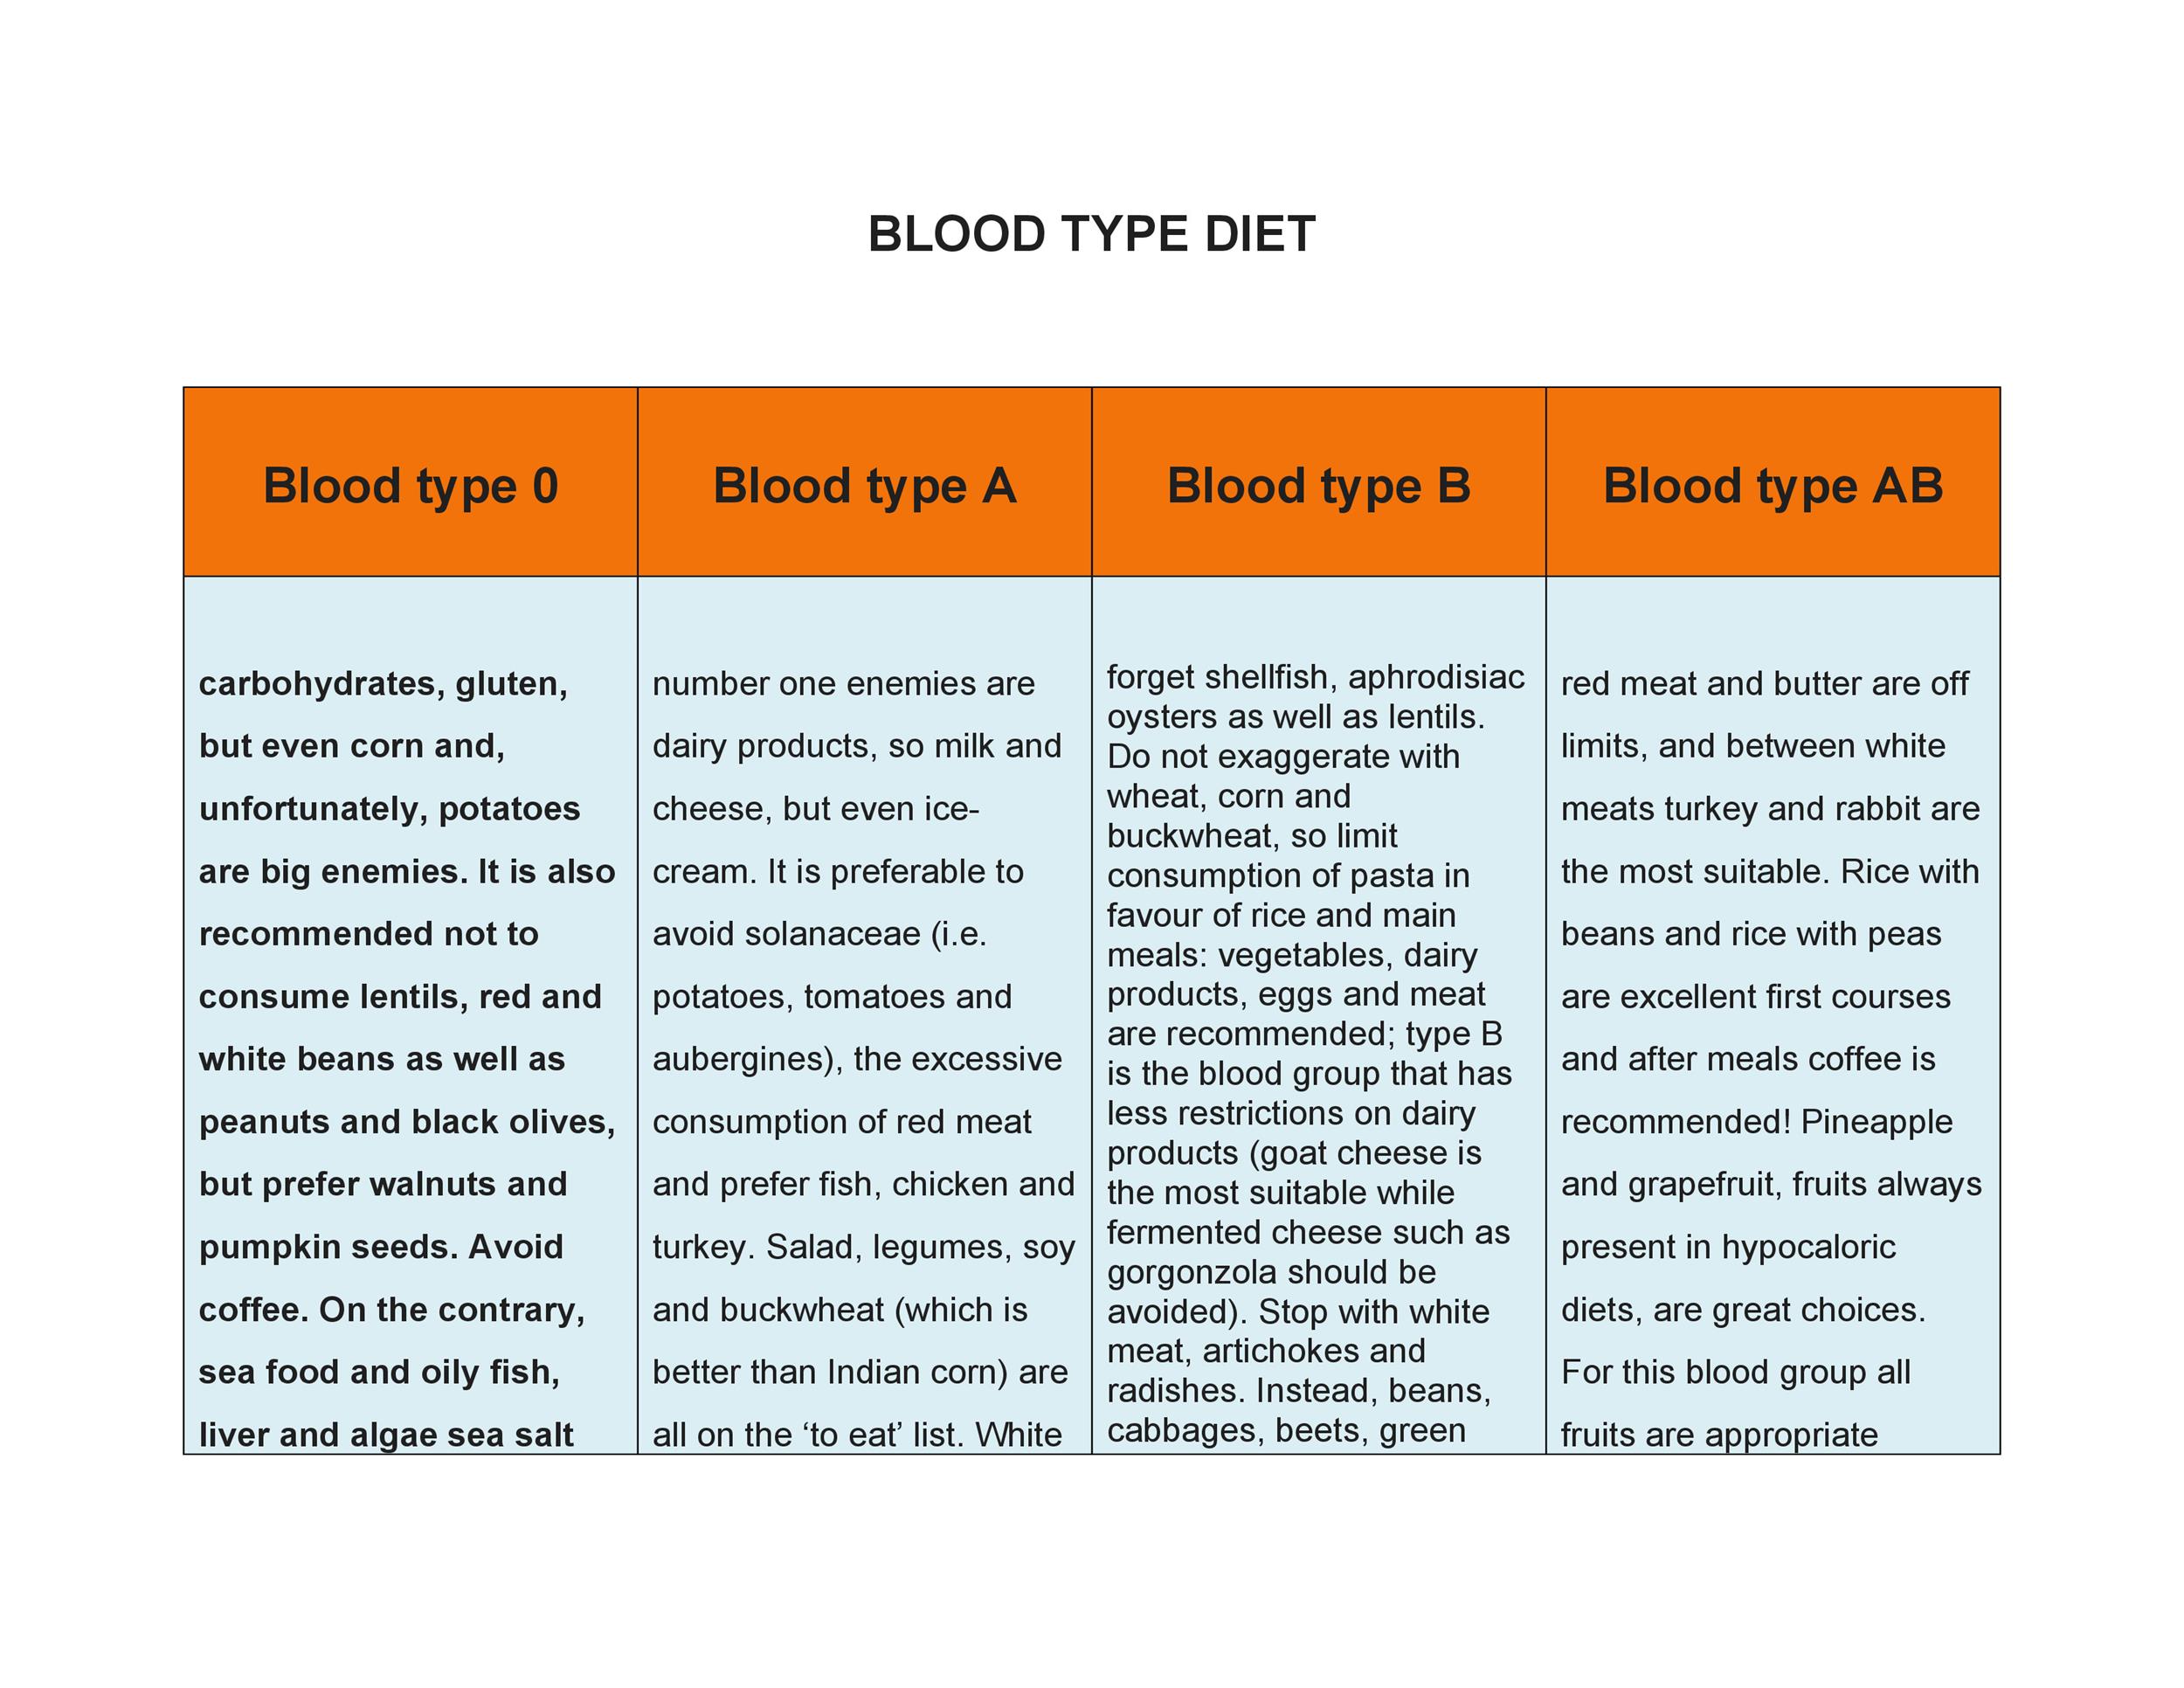 Ab Positive Blood Type Diet Chart